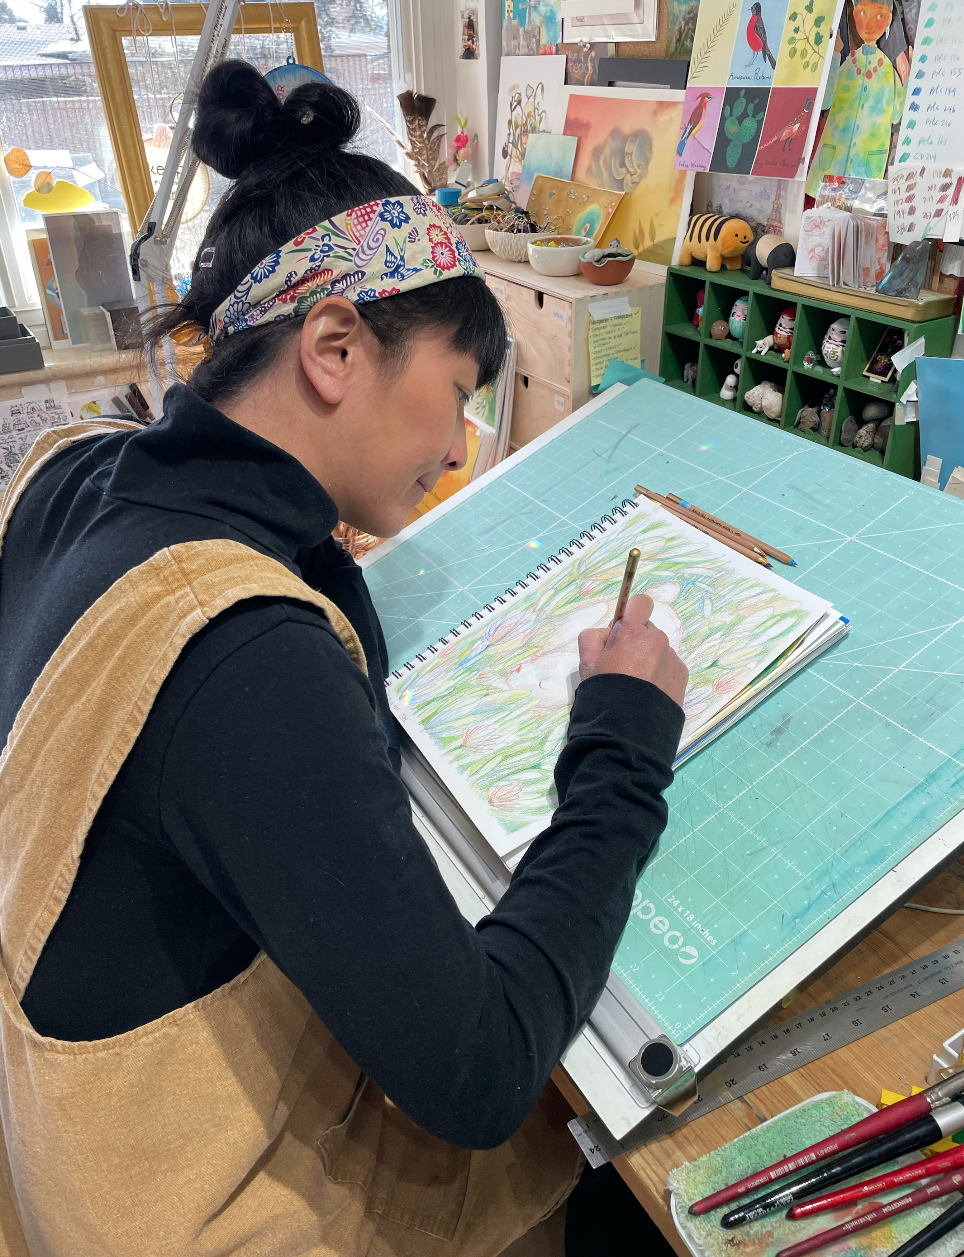 Pictured: Saki Tanaka drawing in her sketchbook at her table in her studio.